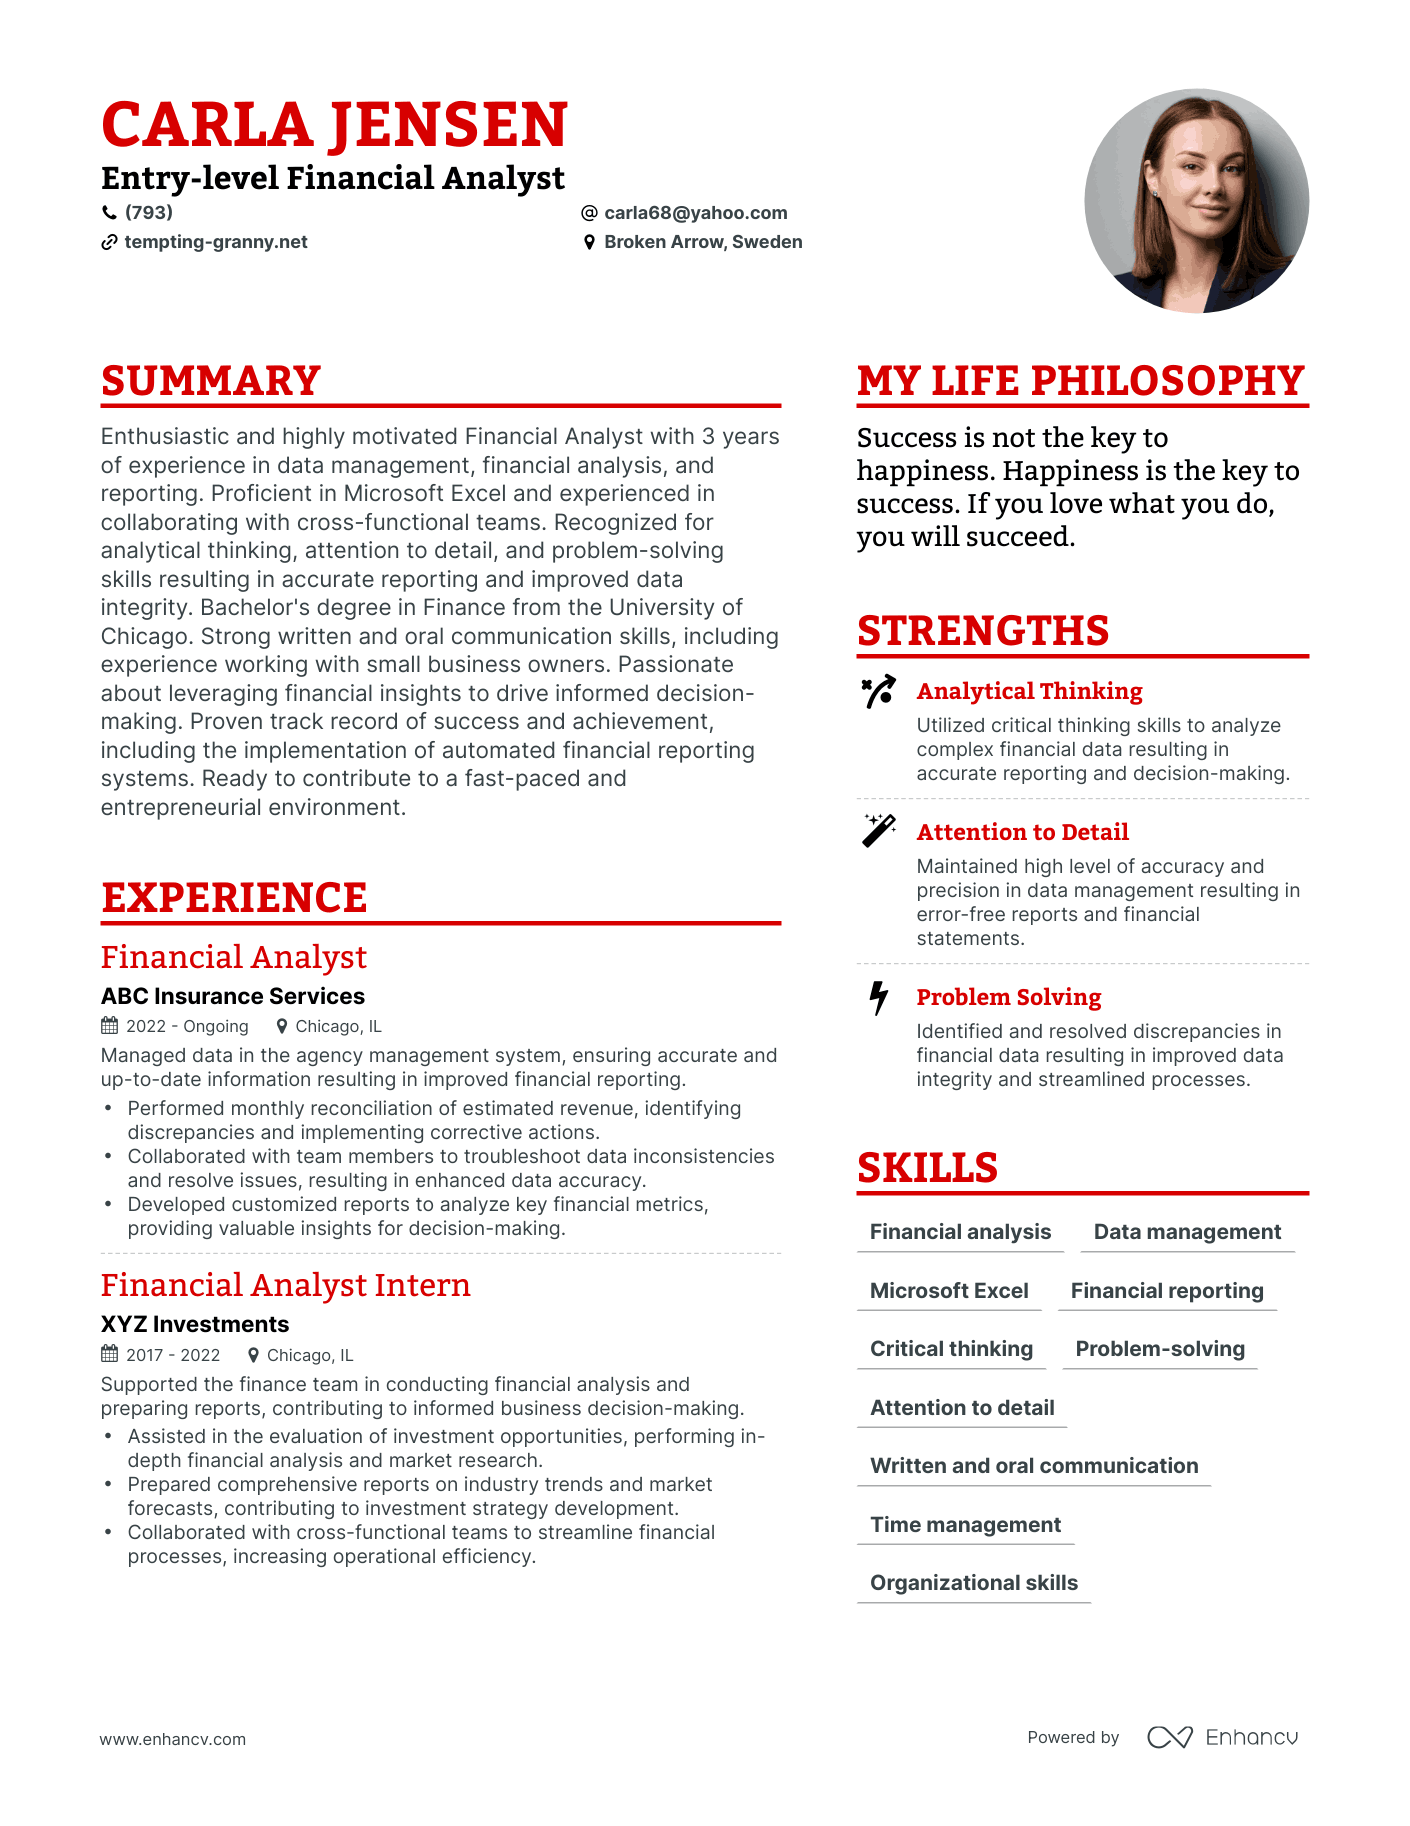 Entry-level Financial Analyst resume example